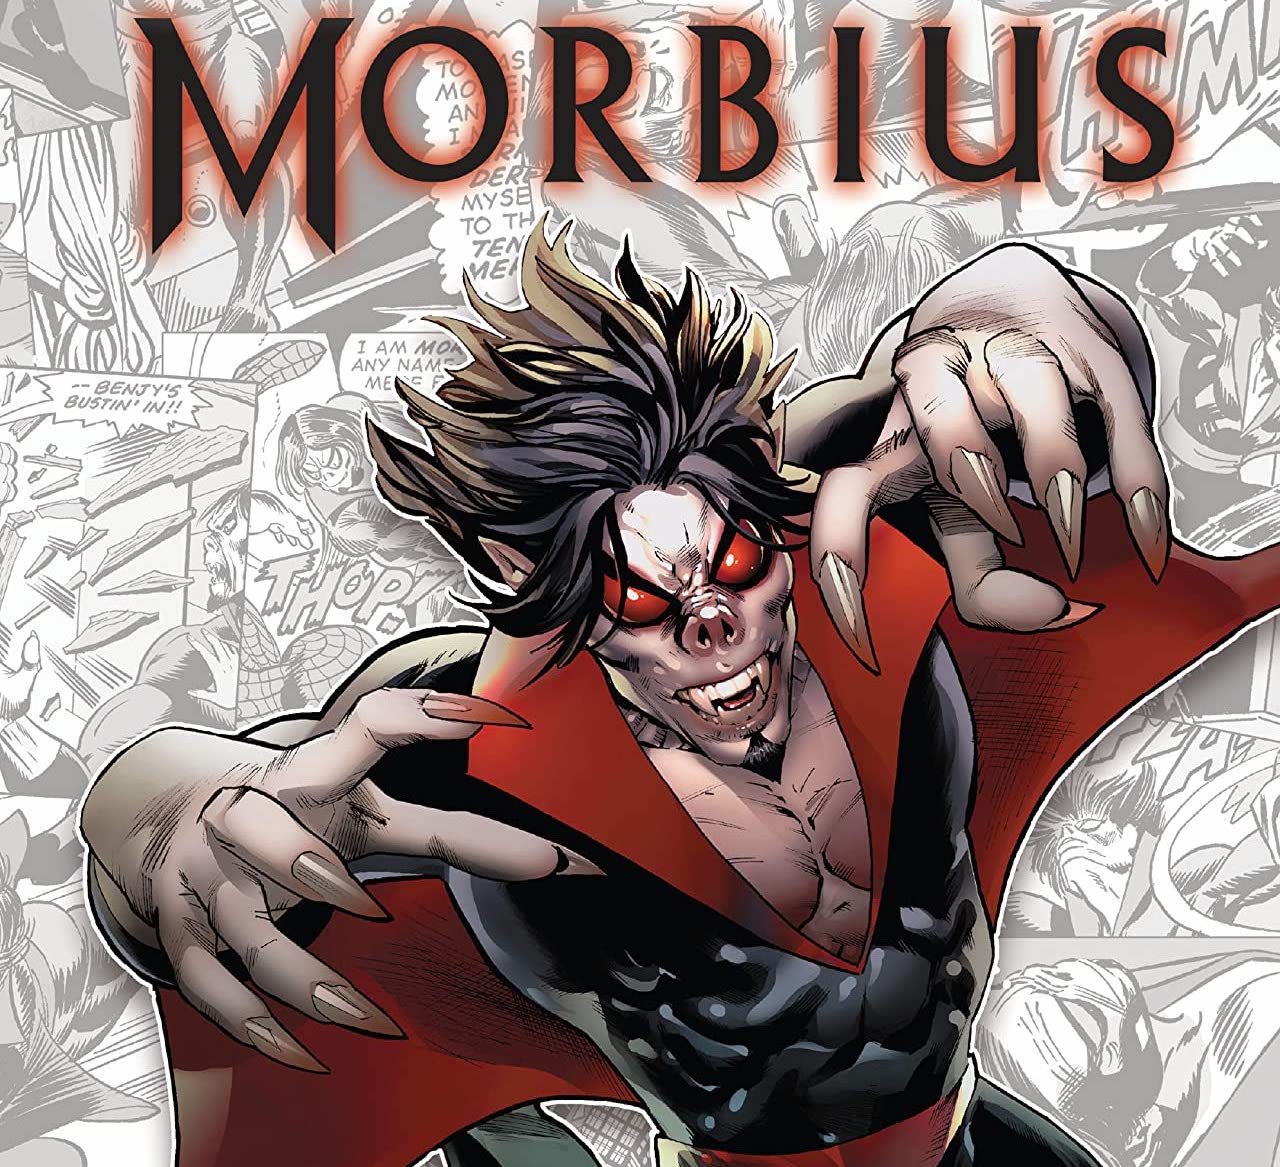 'Marvel-Verse: Morbius' is the perfect starter to the character